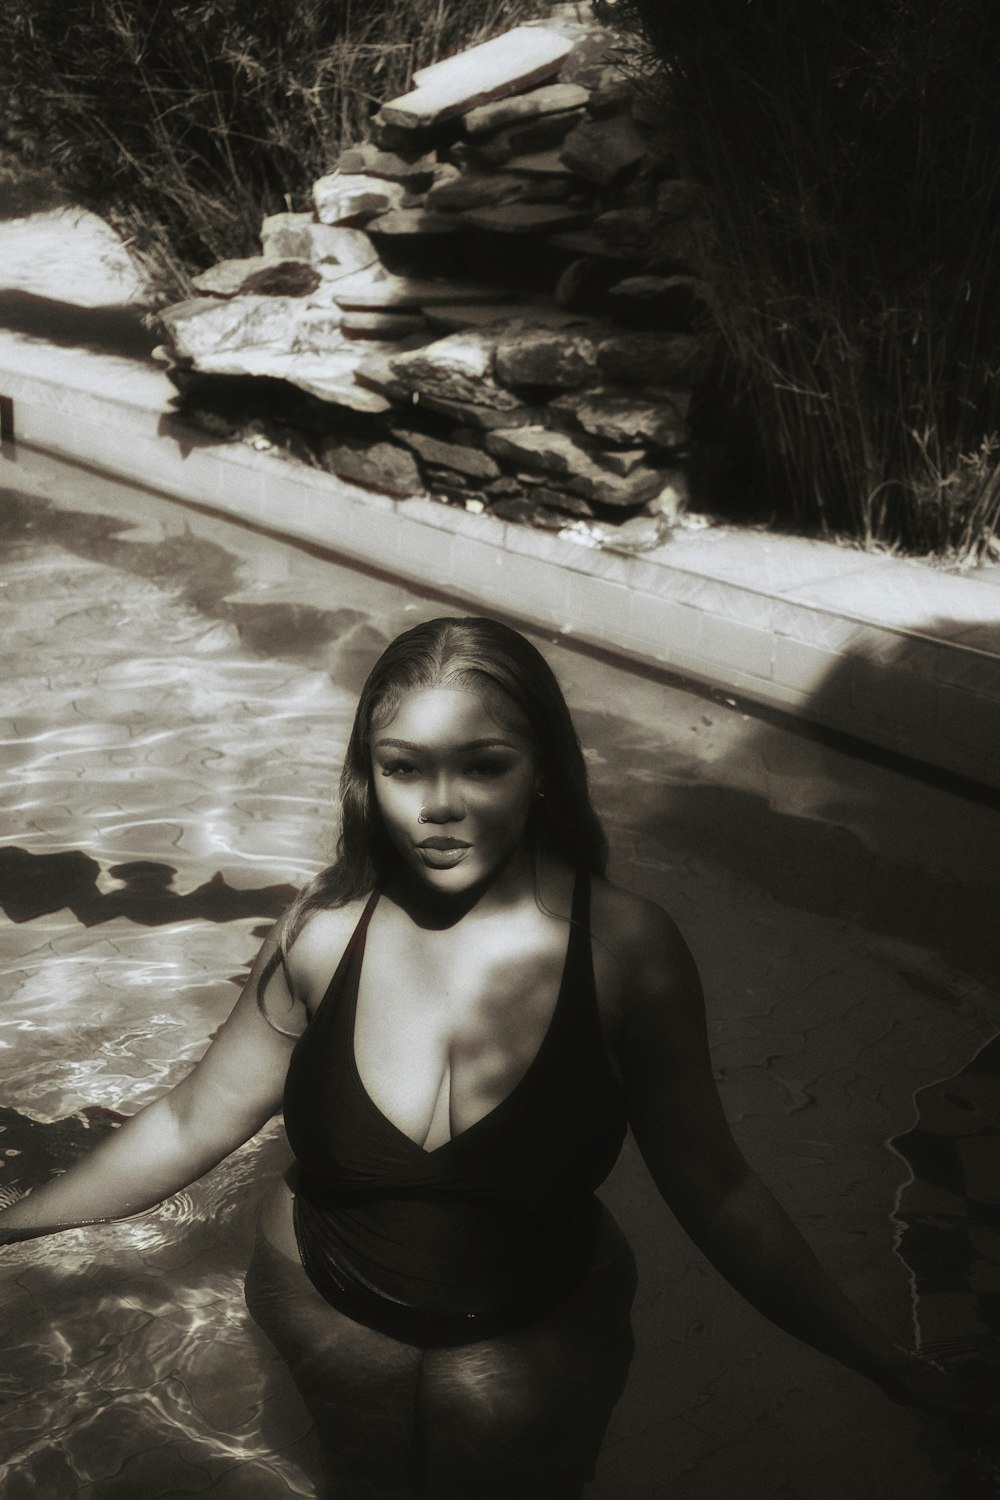 a woman in a bathing suit standing in a pool